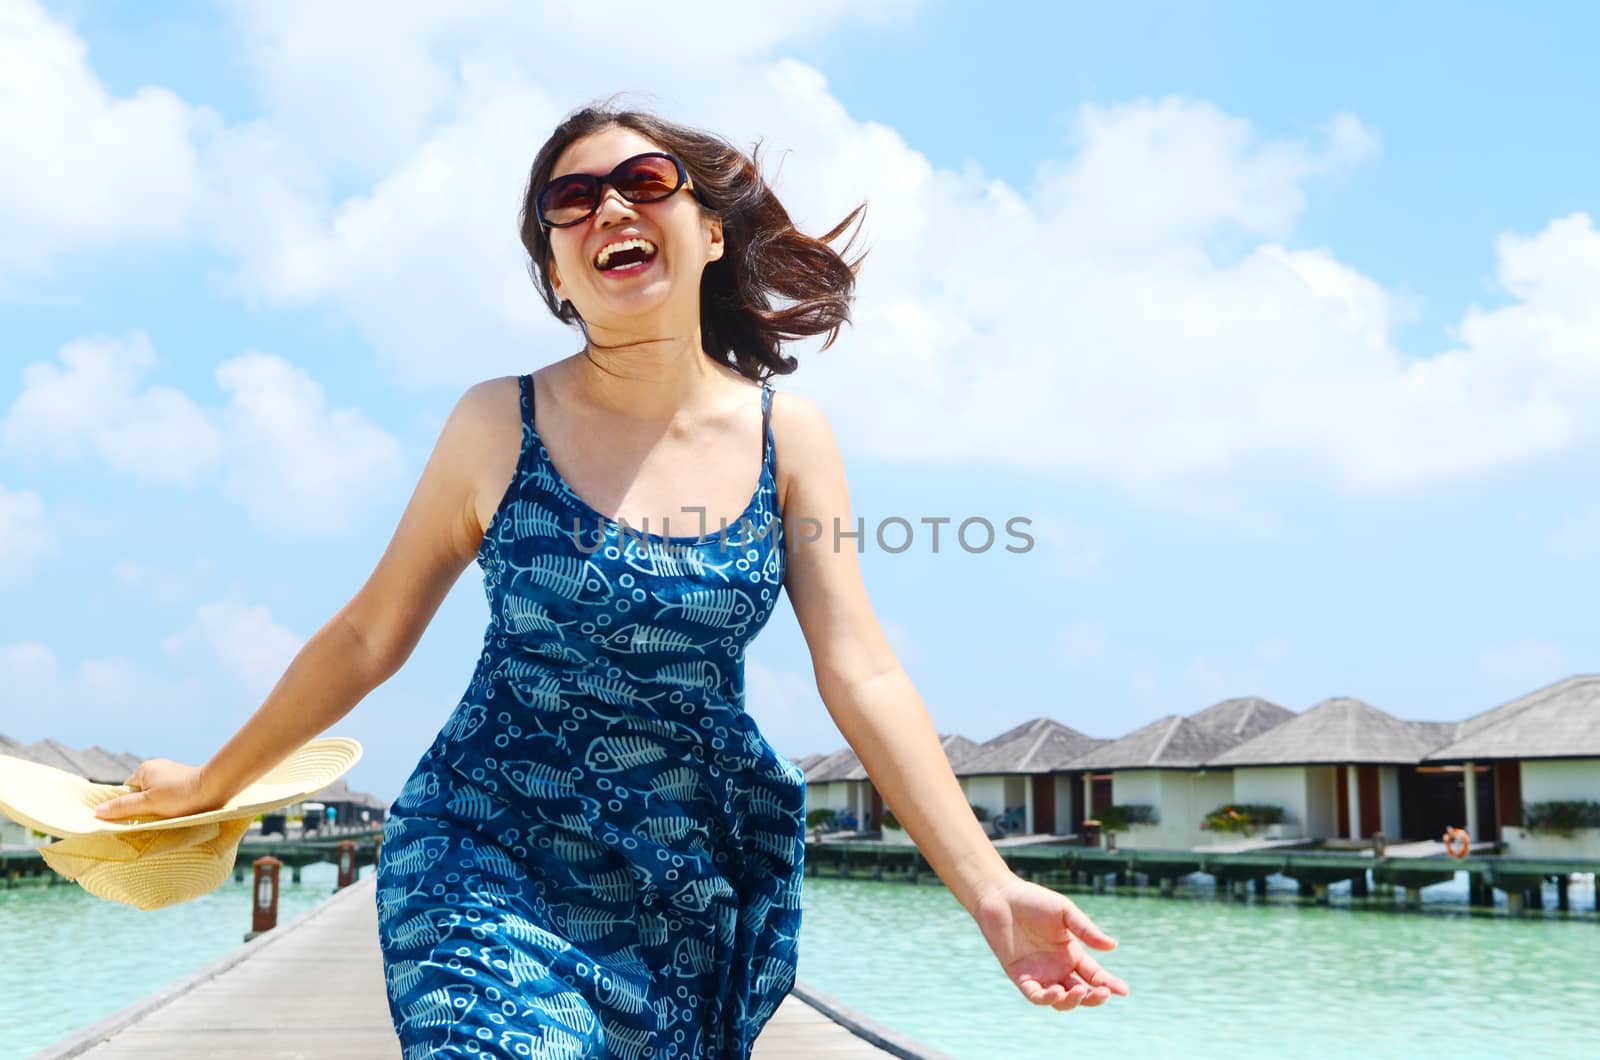 close-up portrait of a beautiful young asian girl with long hair on a background of blue sea and sky with clouds on a sunny day, lifestyle, posing and smiling.